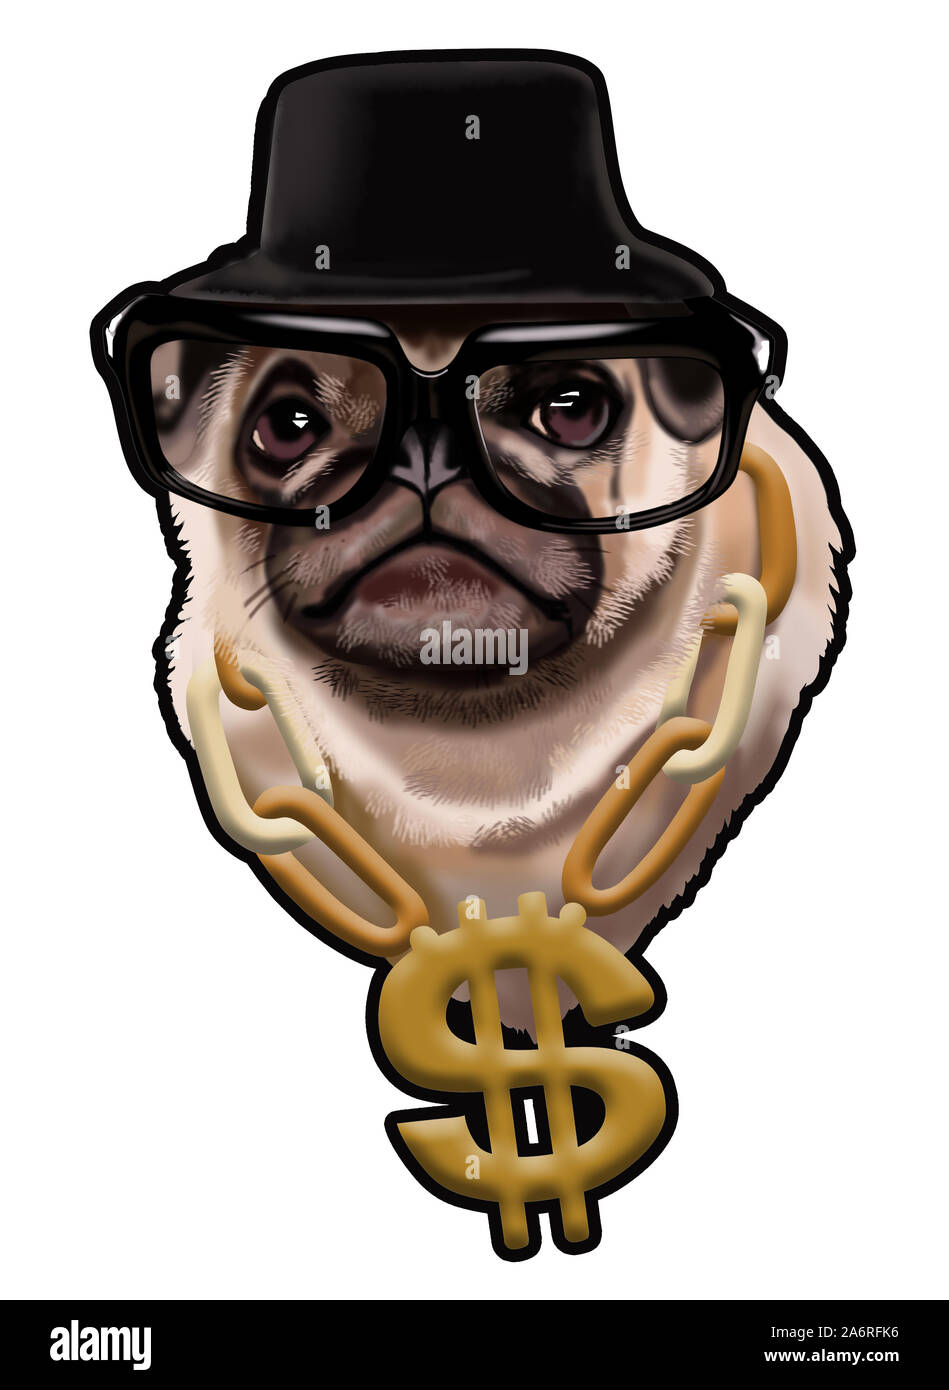 Illustration of a pug in a black hat and glasses with a golden chain, digital illustration portrait of a pug. Brutal pug, printable image on a t-shirt Stock Photo